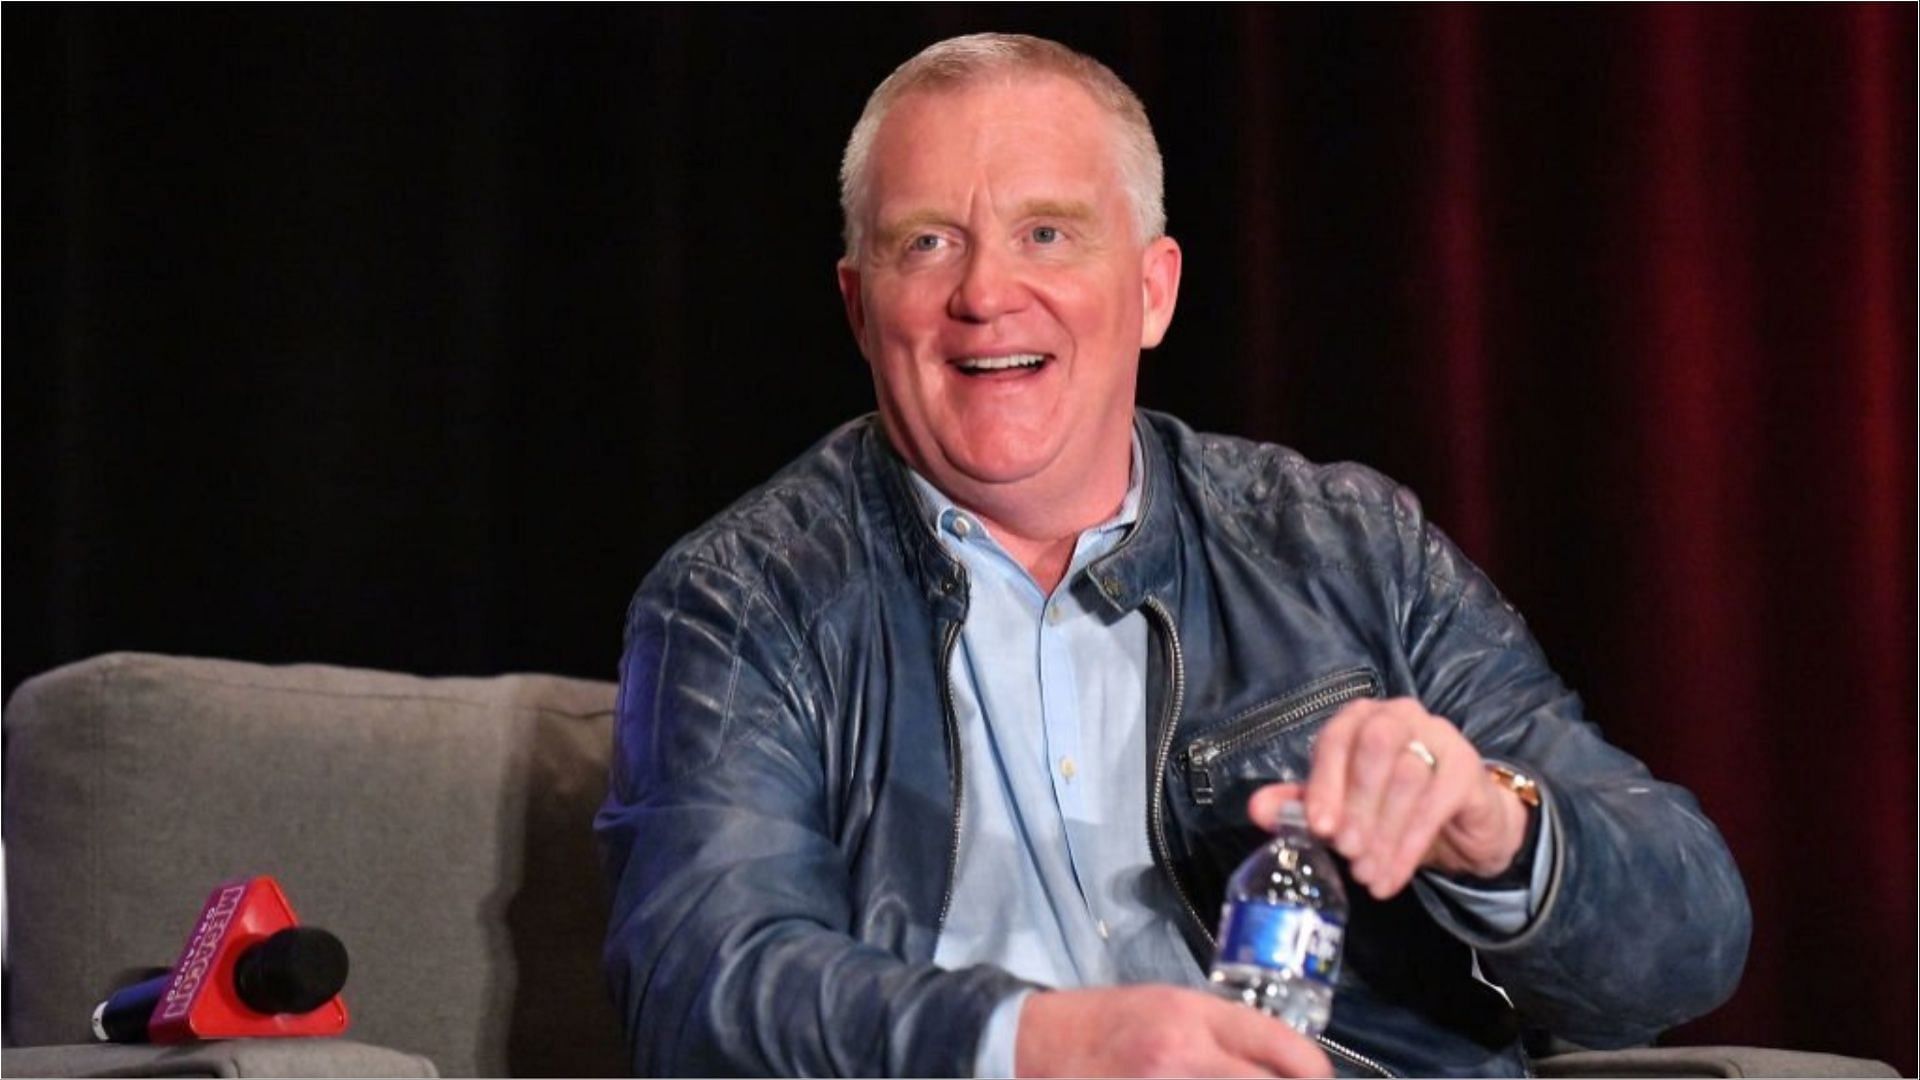 Anthony Michael Hall has earned a lot from his acting career (Image via Gerardo Mora/Getty Images)